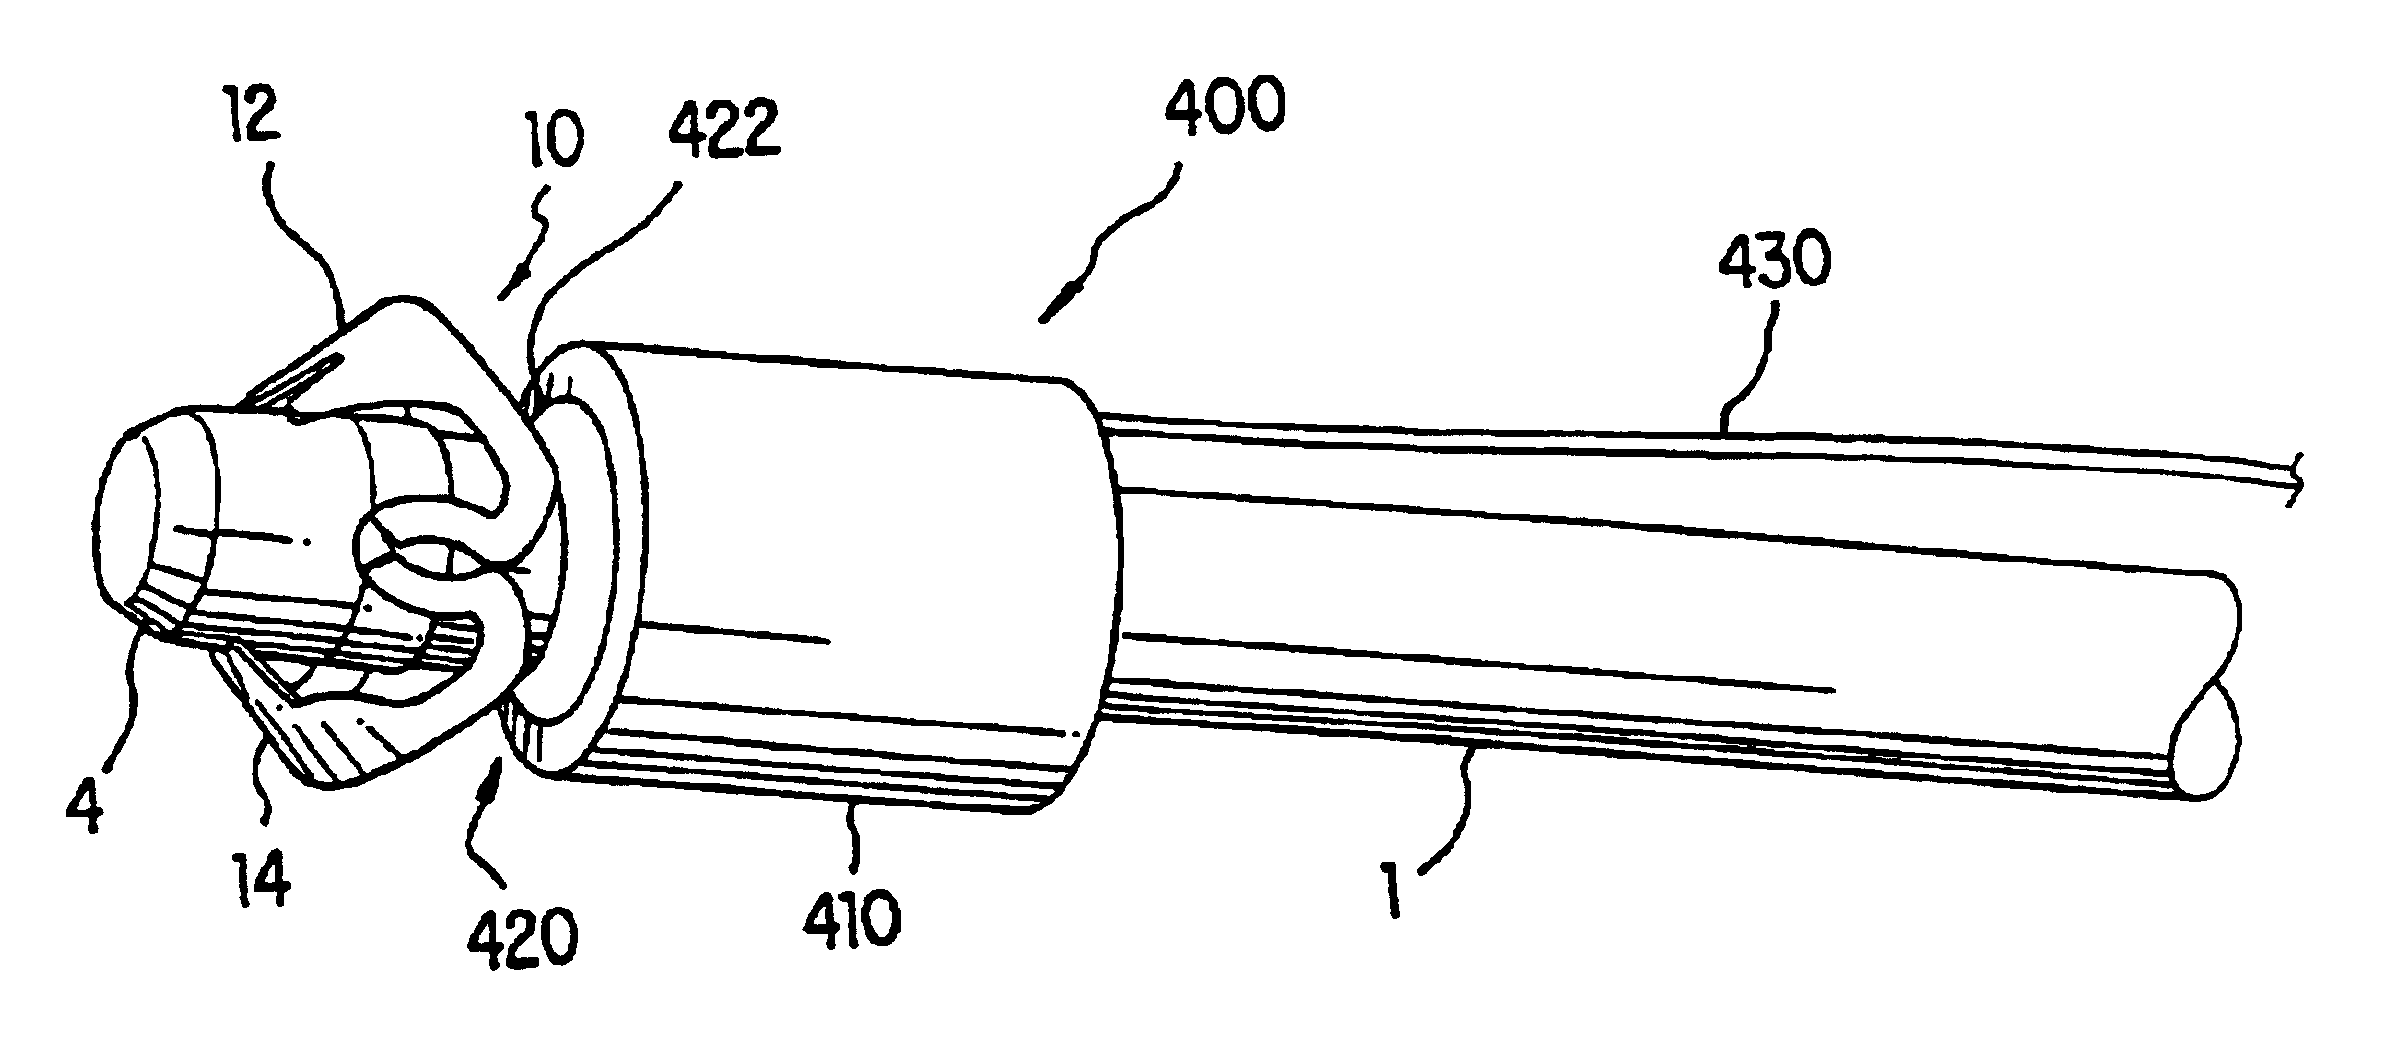 Apparatus and method for compressing body tissue